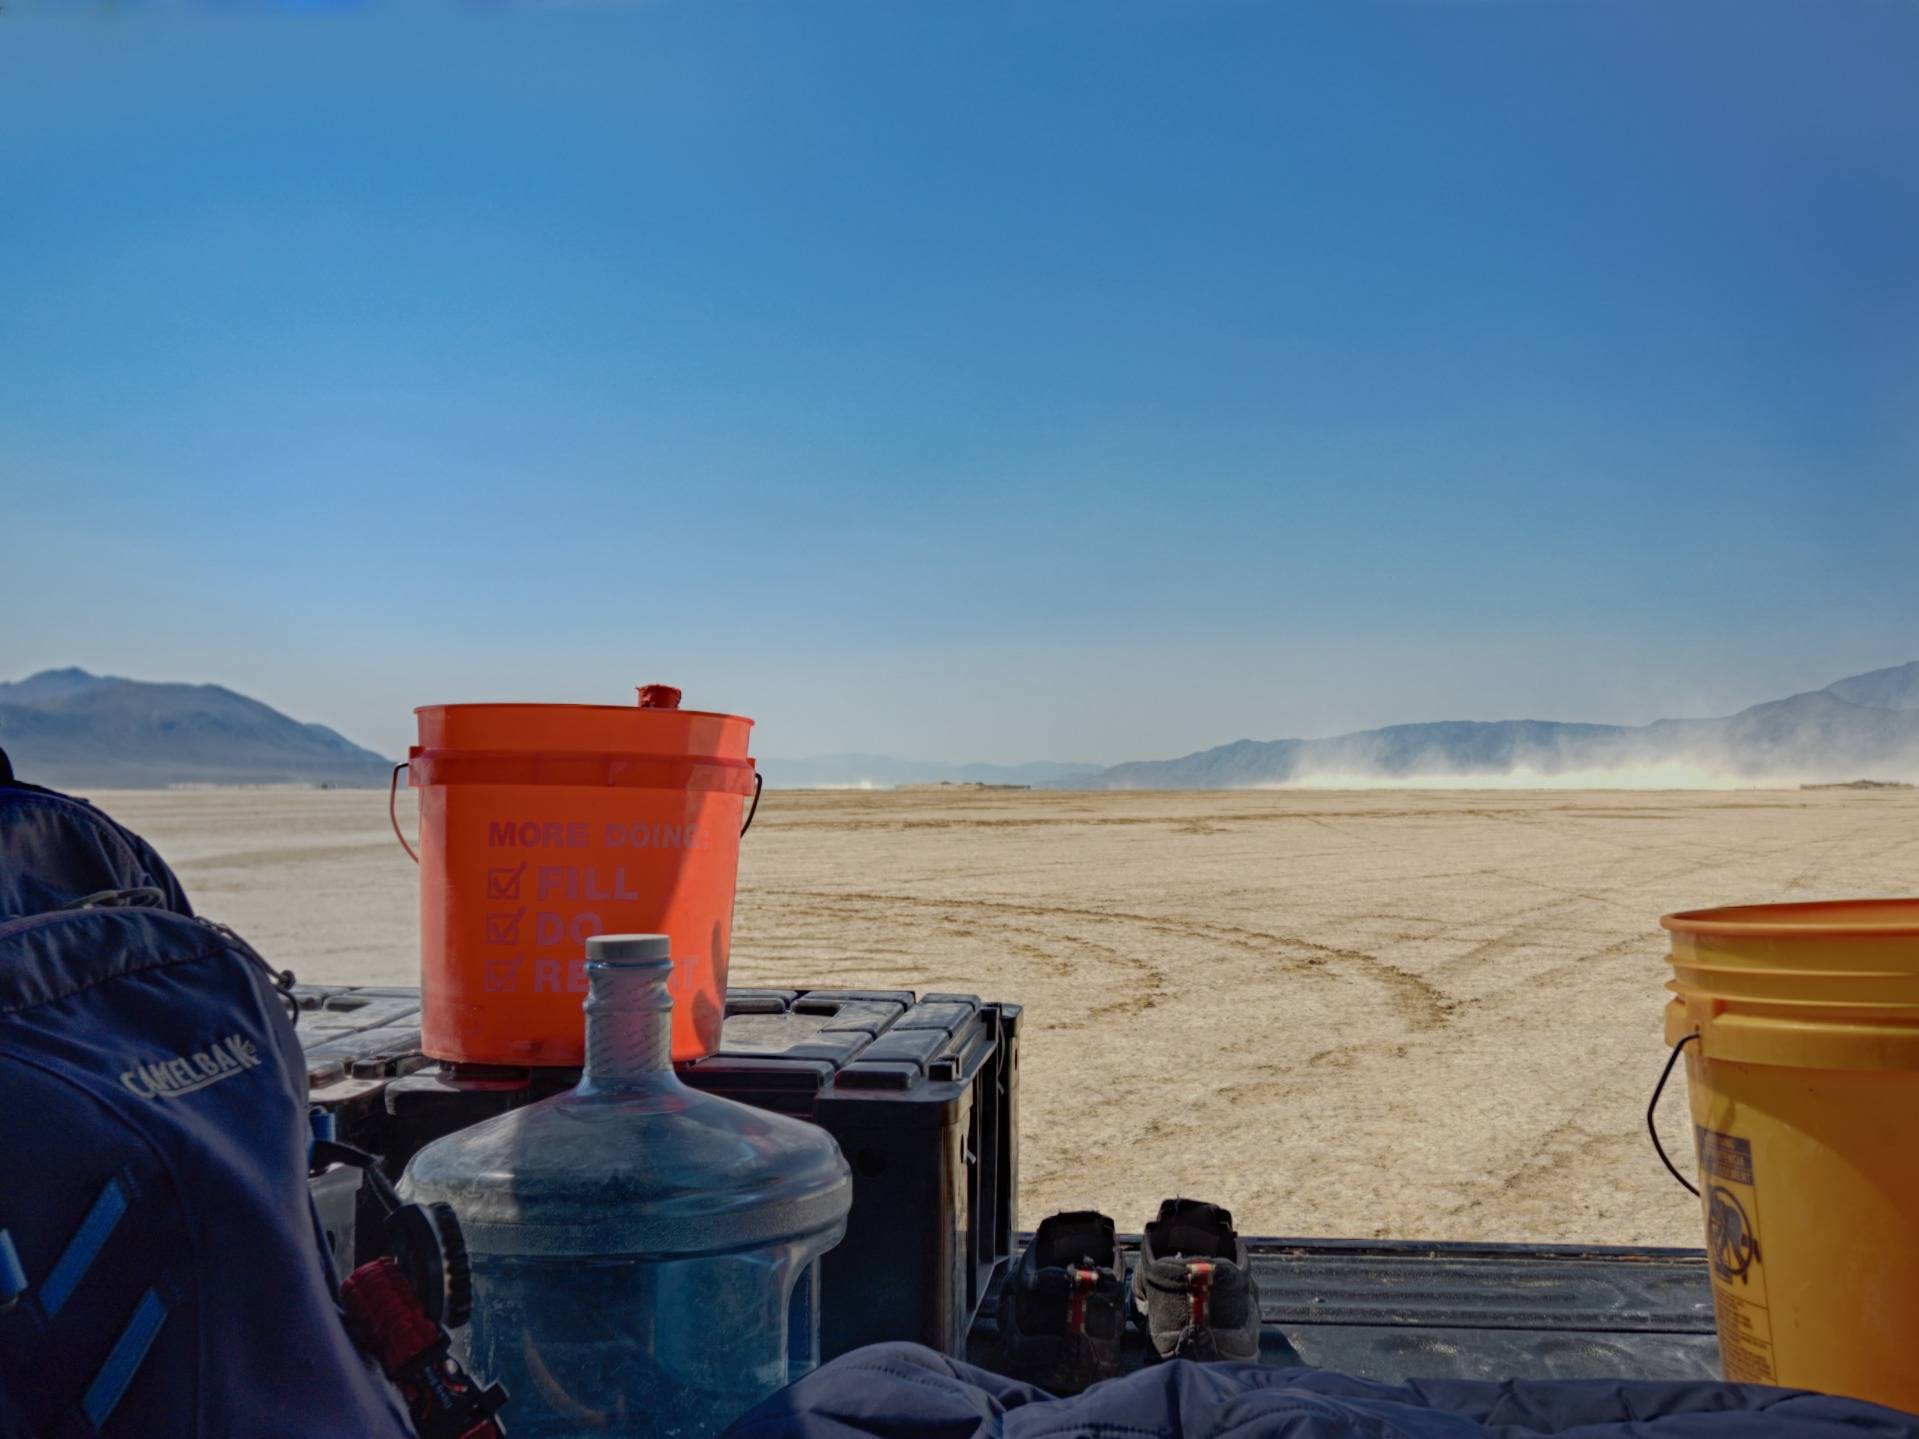 Truck glamping. The playa is alkali flat and hard on the skin. It was too hot for shoes, so I hid out in the bed of the truck watching and waving to the people driving and flying by.